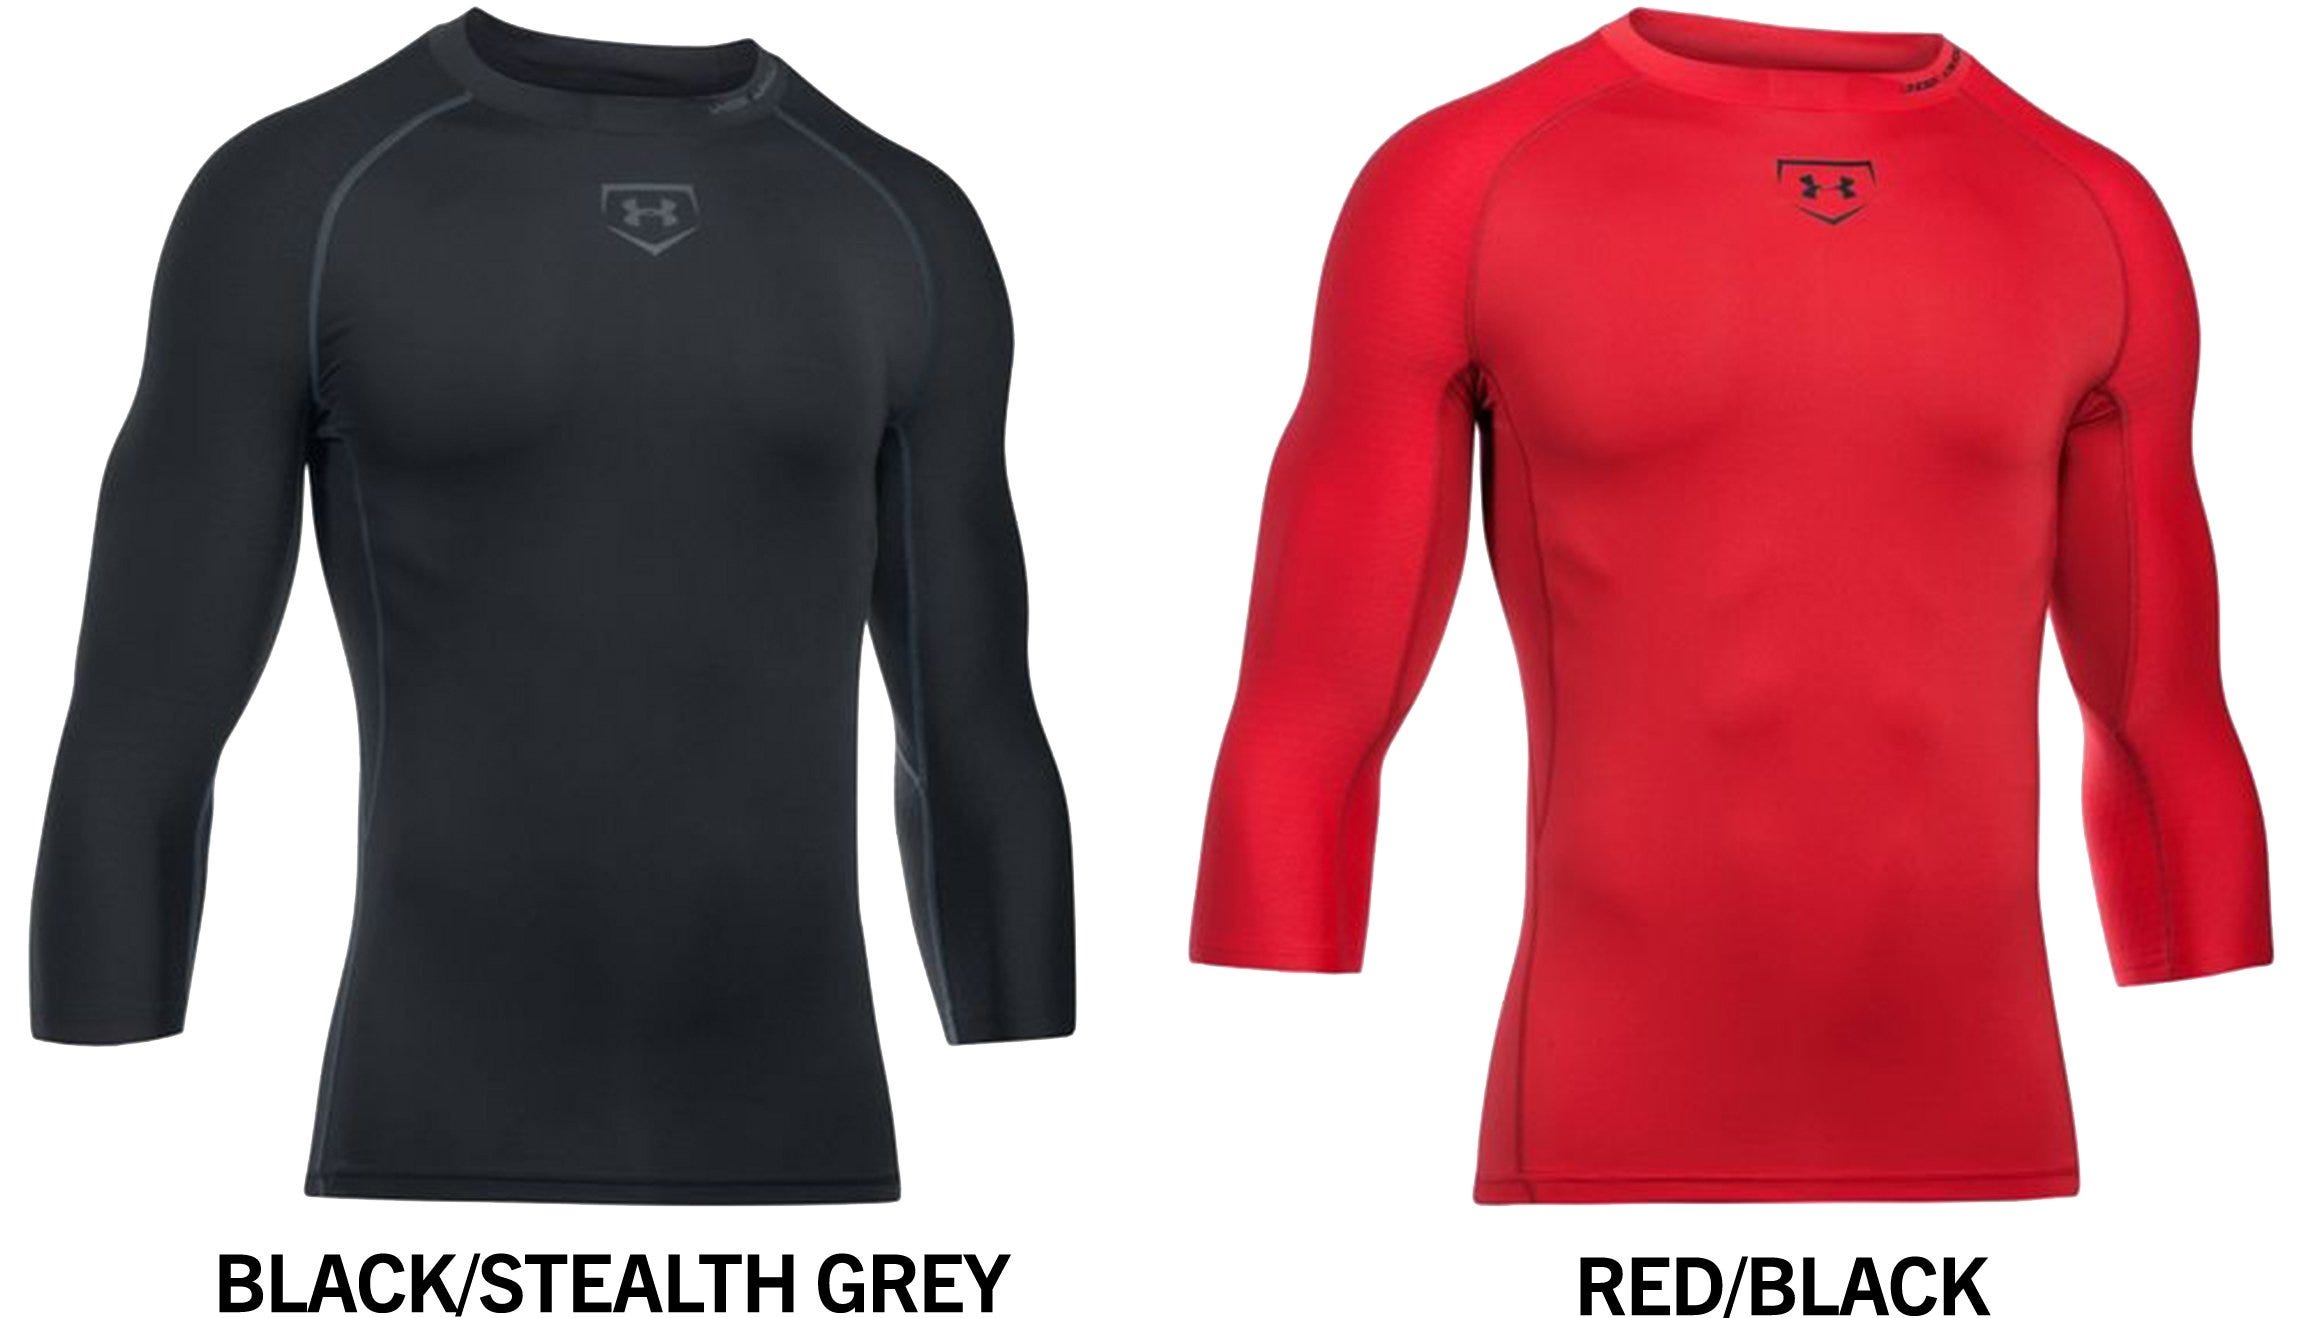 Under Armour Zonal 3/4 Sleeve Compression Shirt